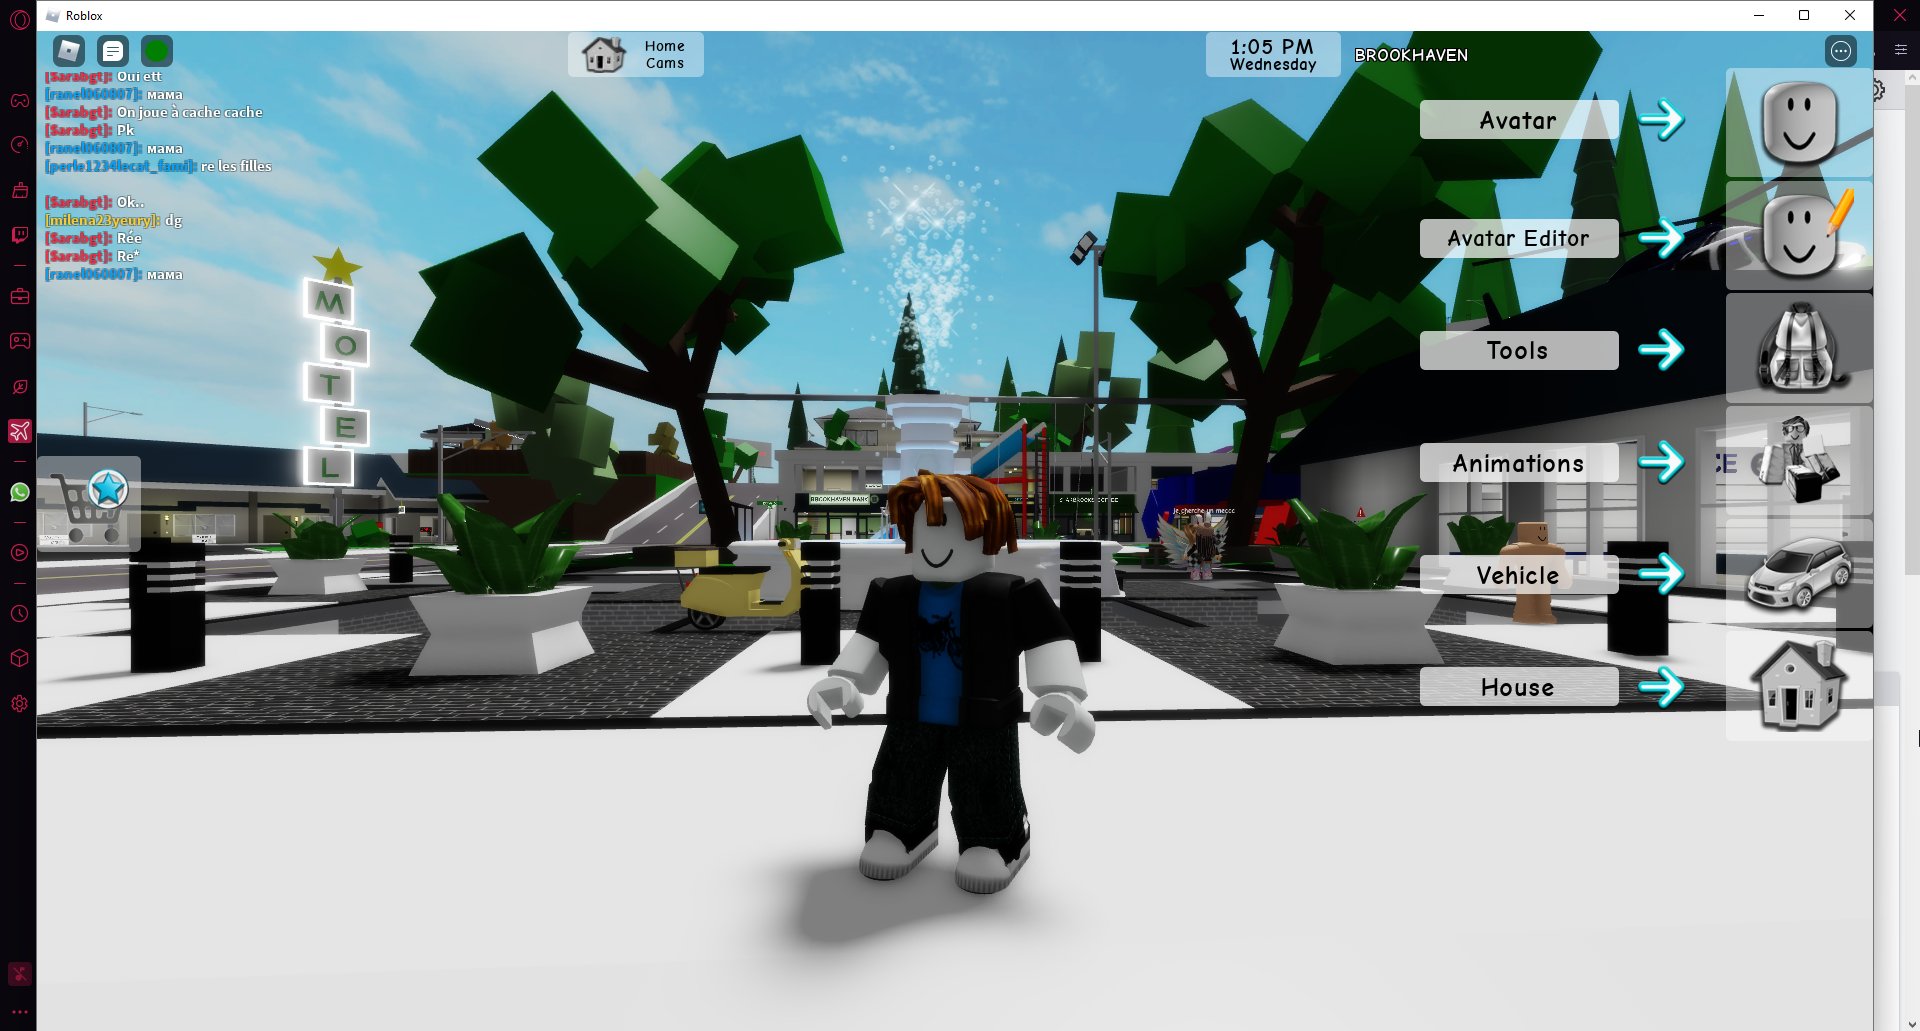 Best Roblox Browser (We've Tested 7, No. 1 Works Flawlessly)